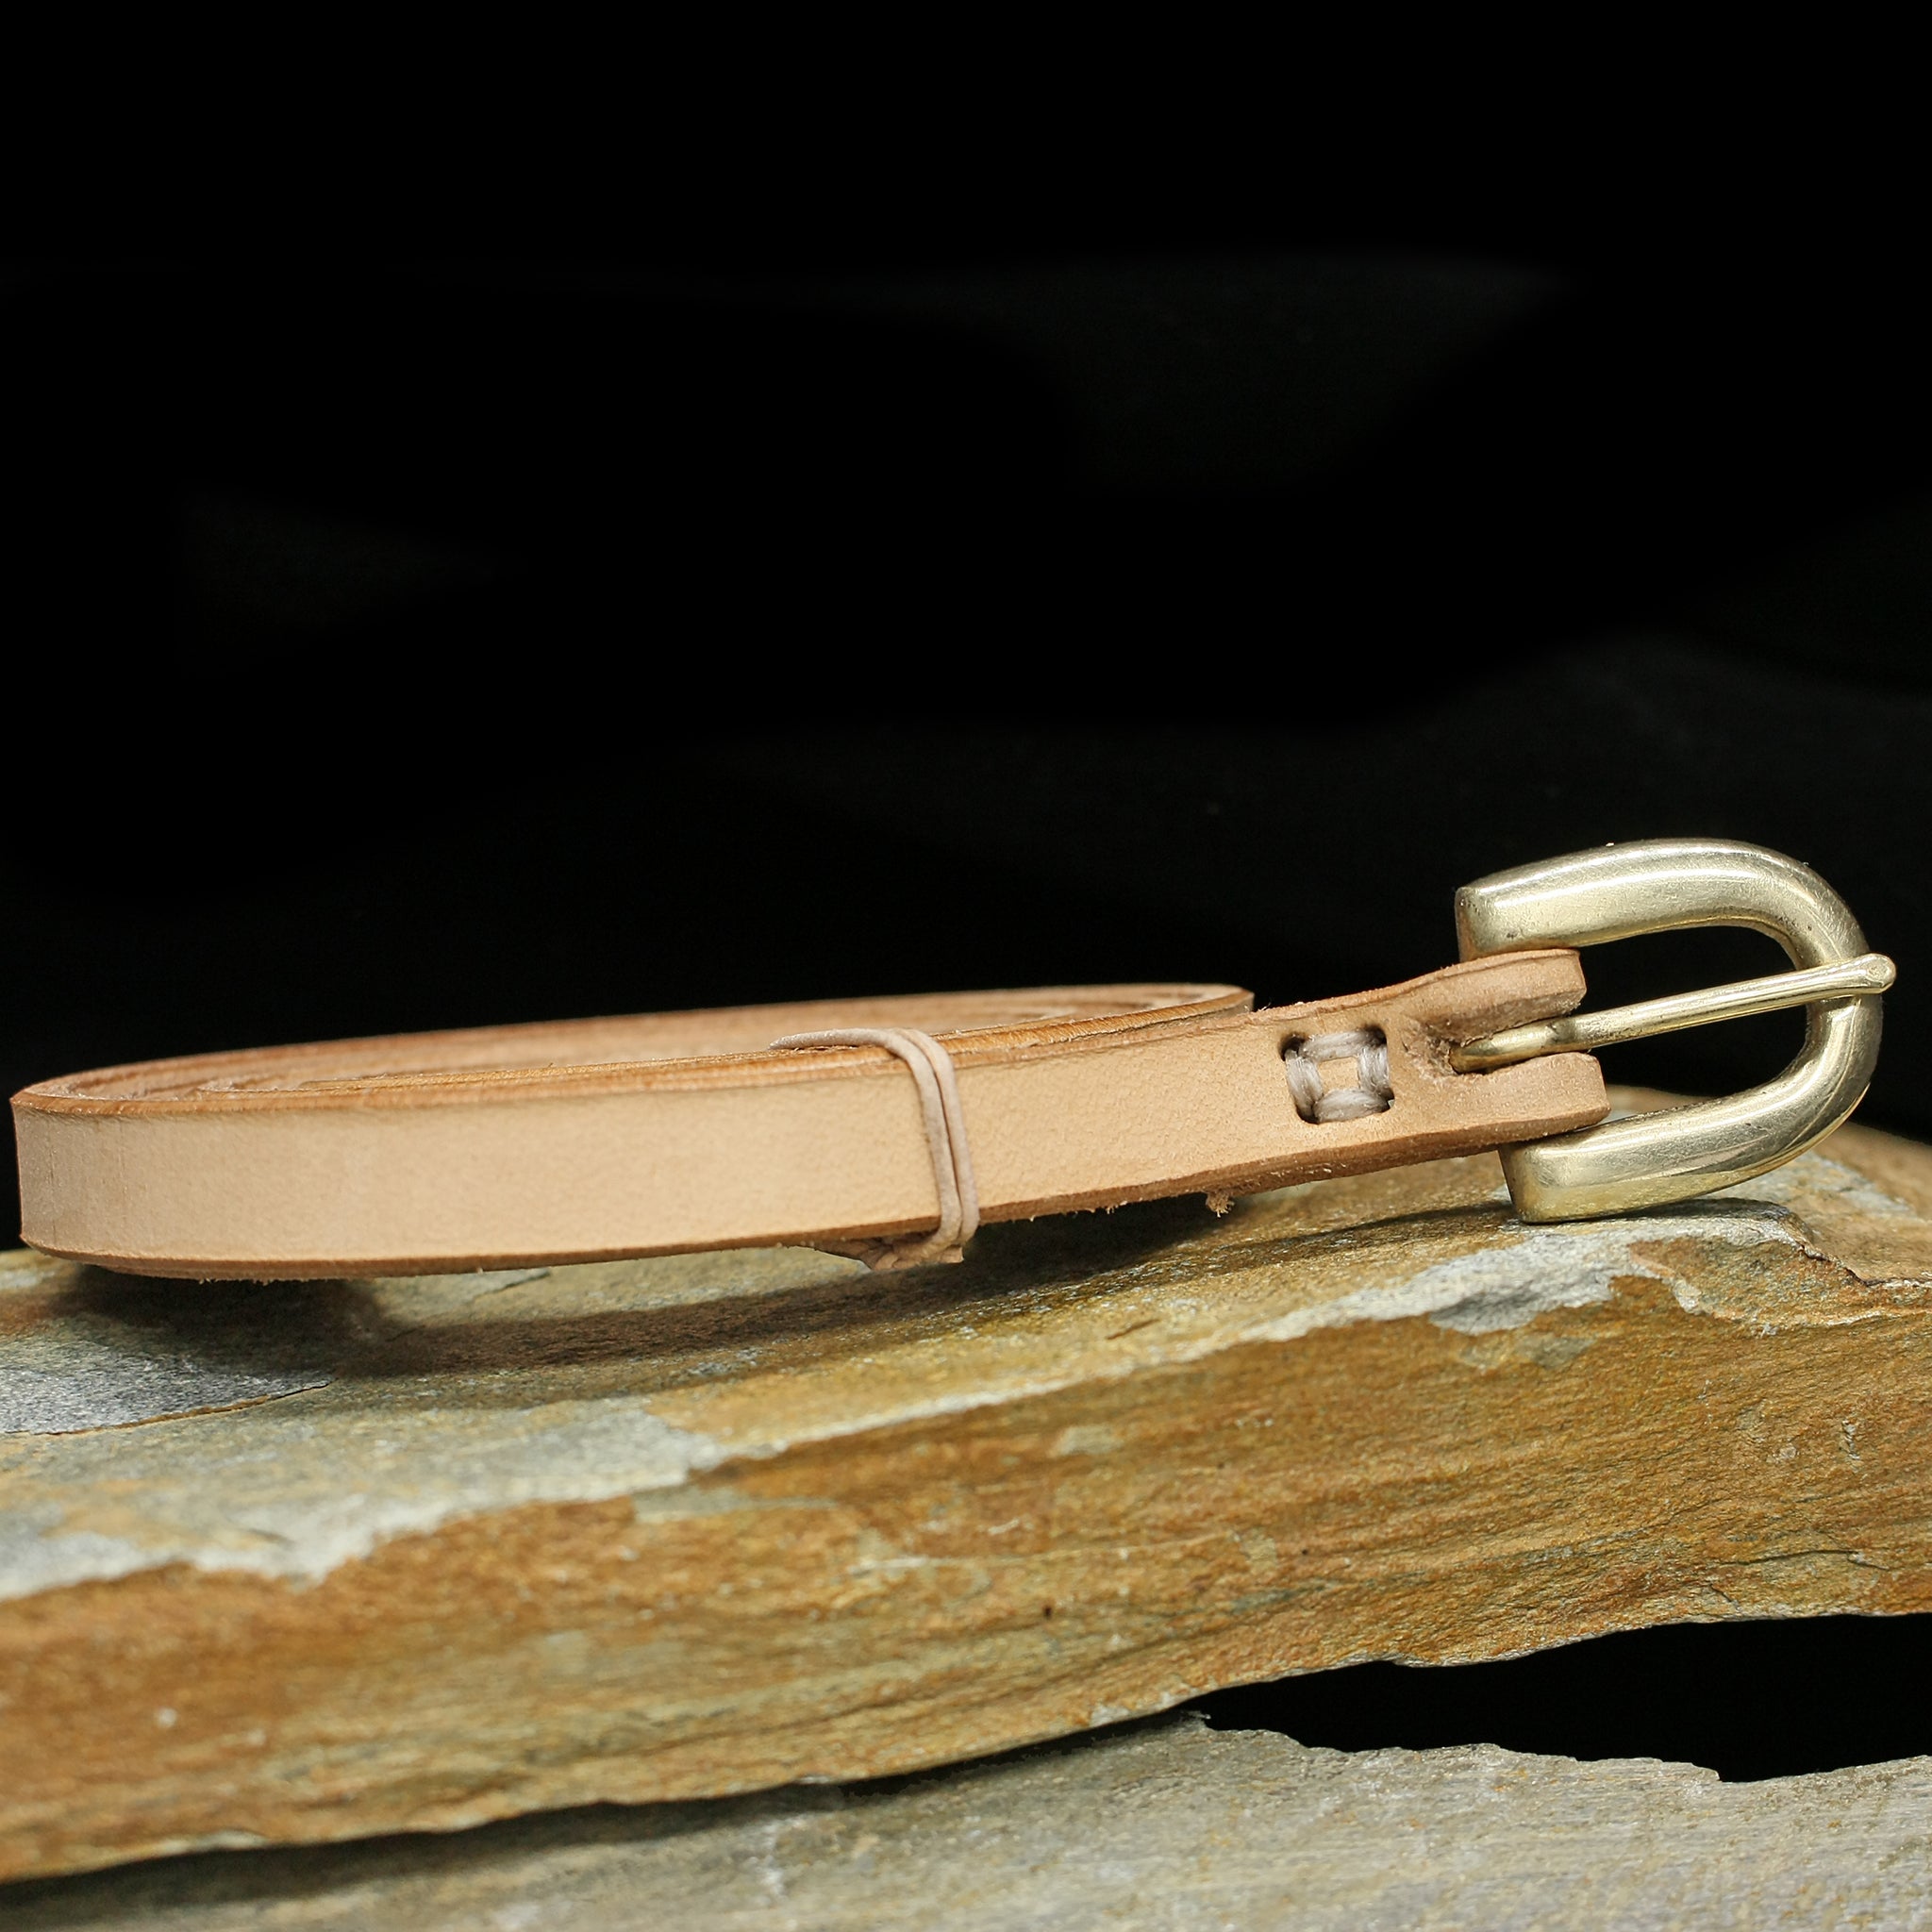 12mm (1/2 inch) leather Viking belt with brass buckle - natural veg tan - on rock